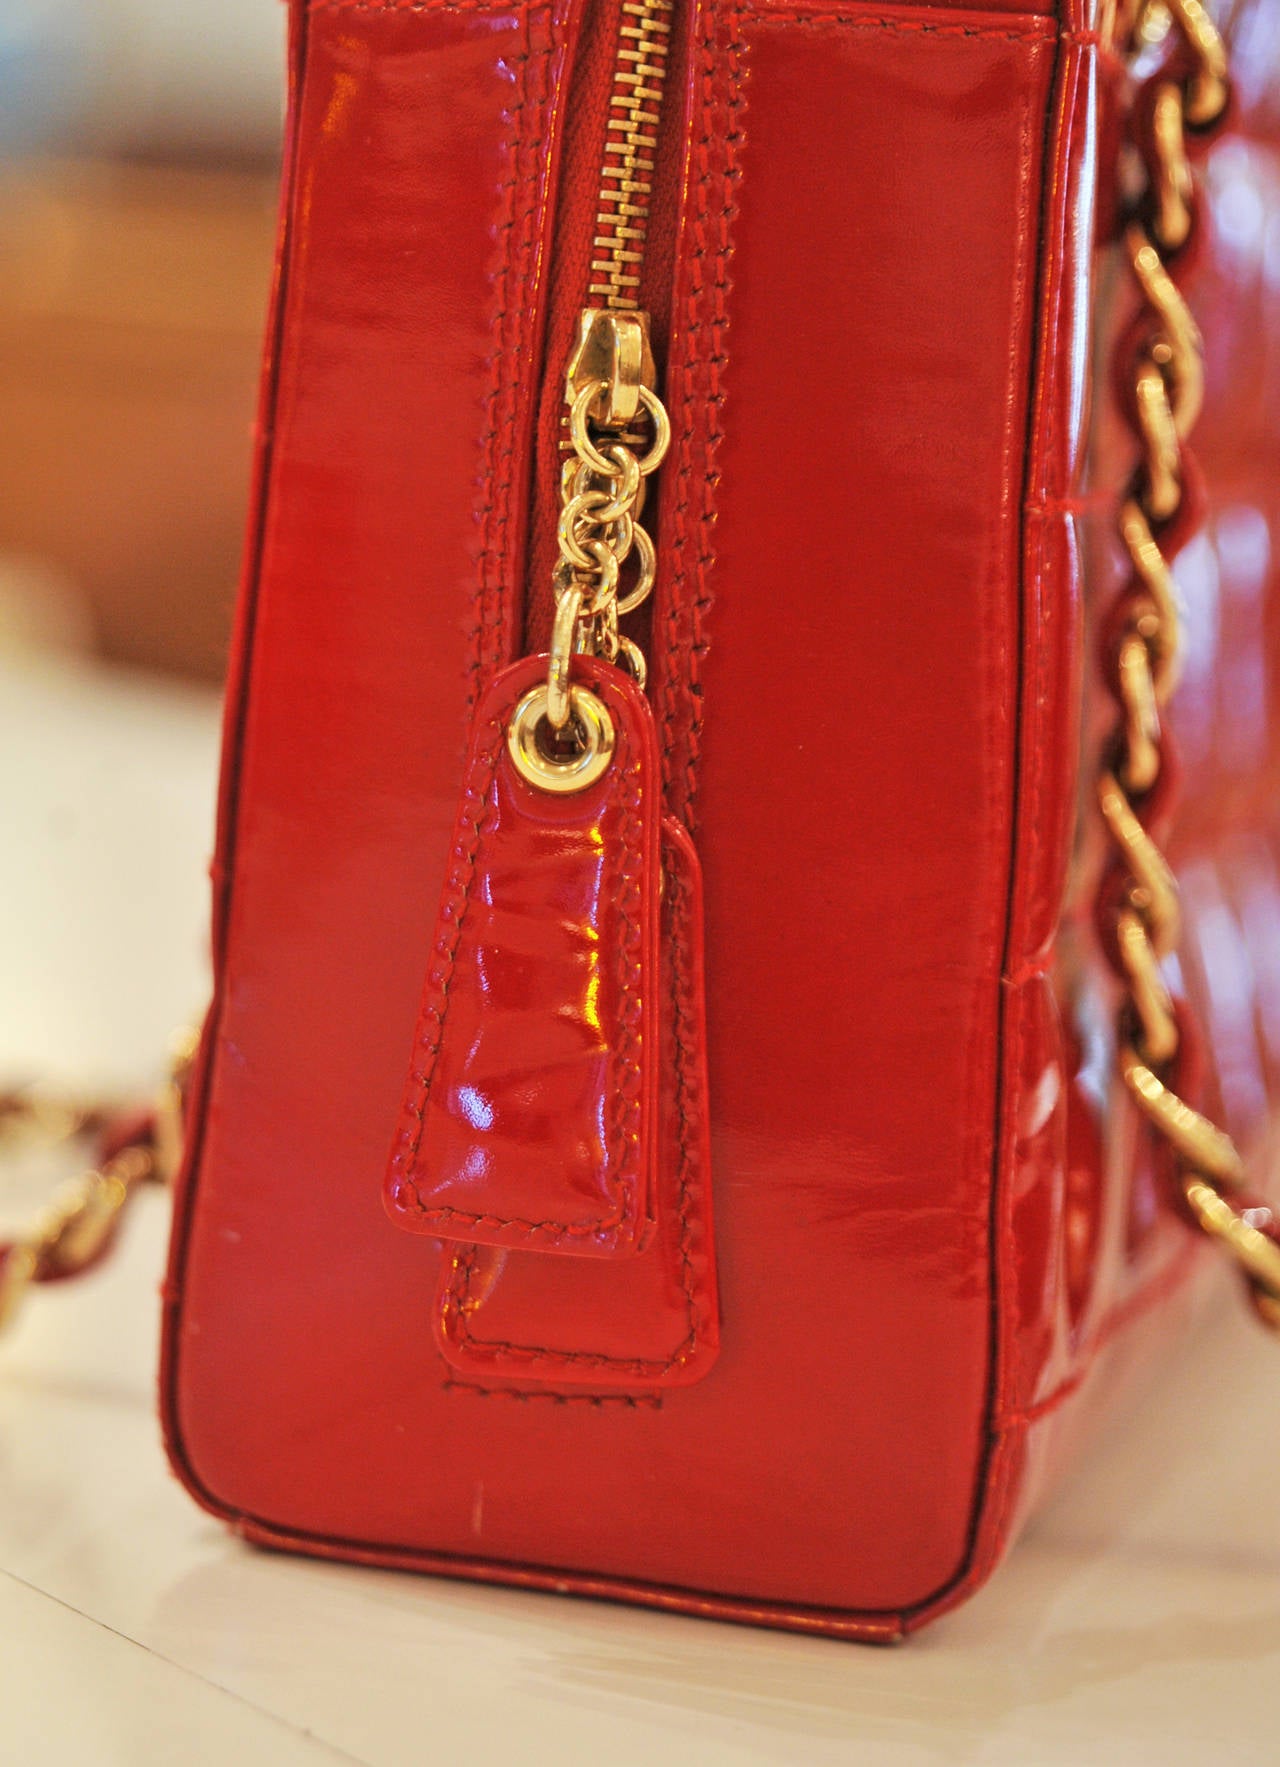 Chanel Candy Apple Red Patent Leather Bag 1